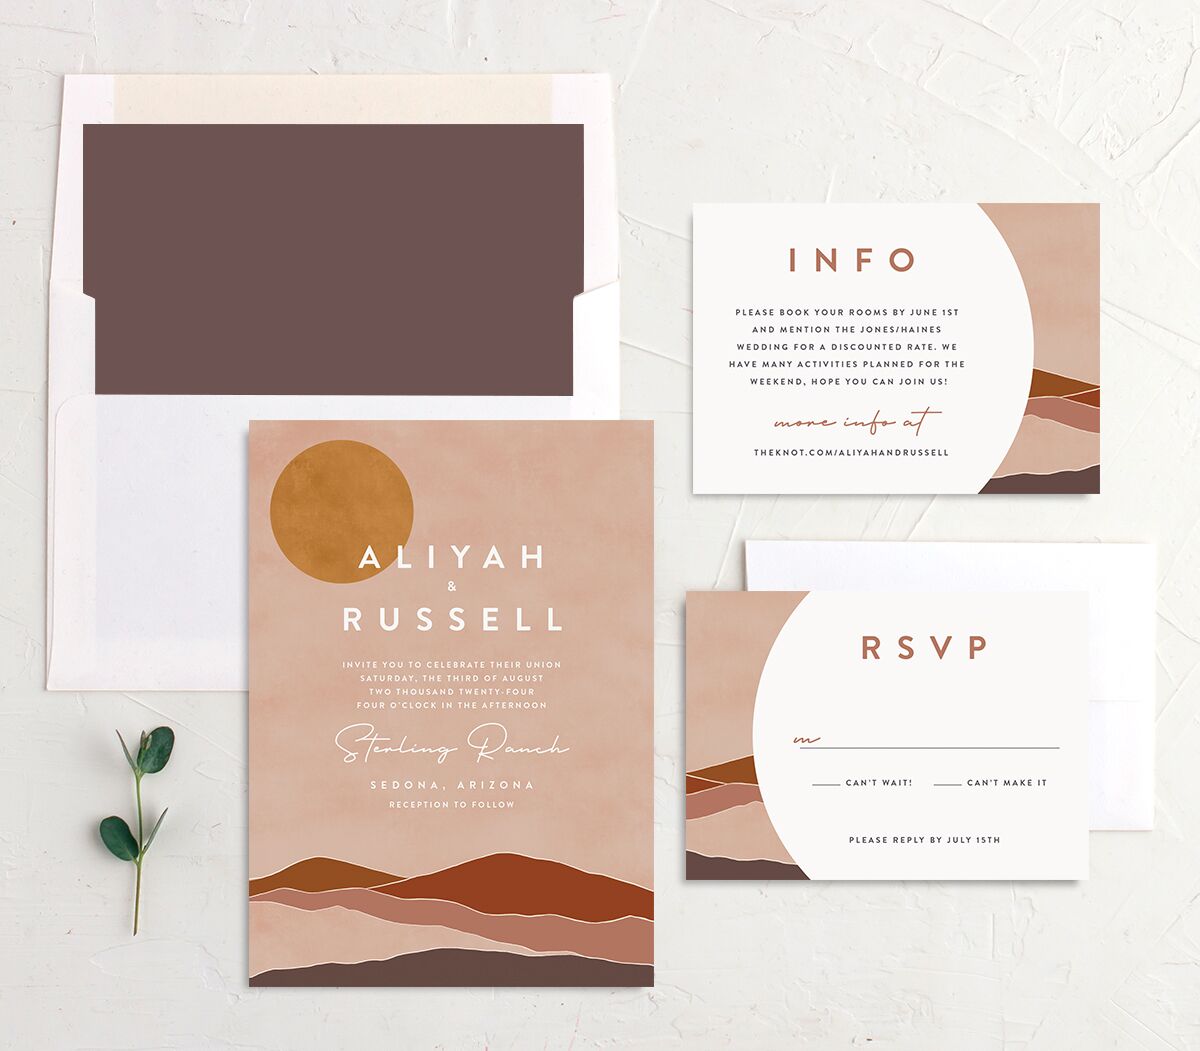 Abstract Hills Wedding Invitations suite